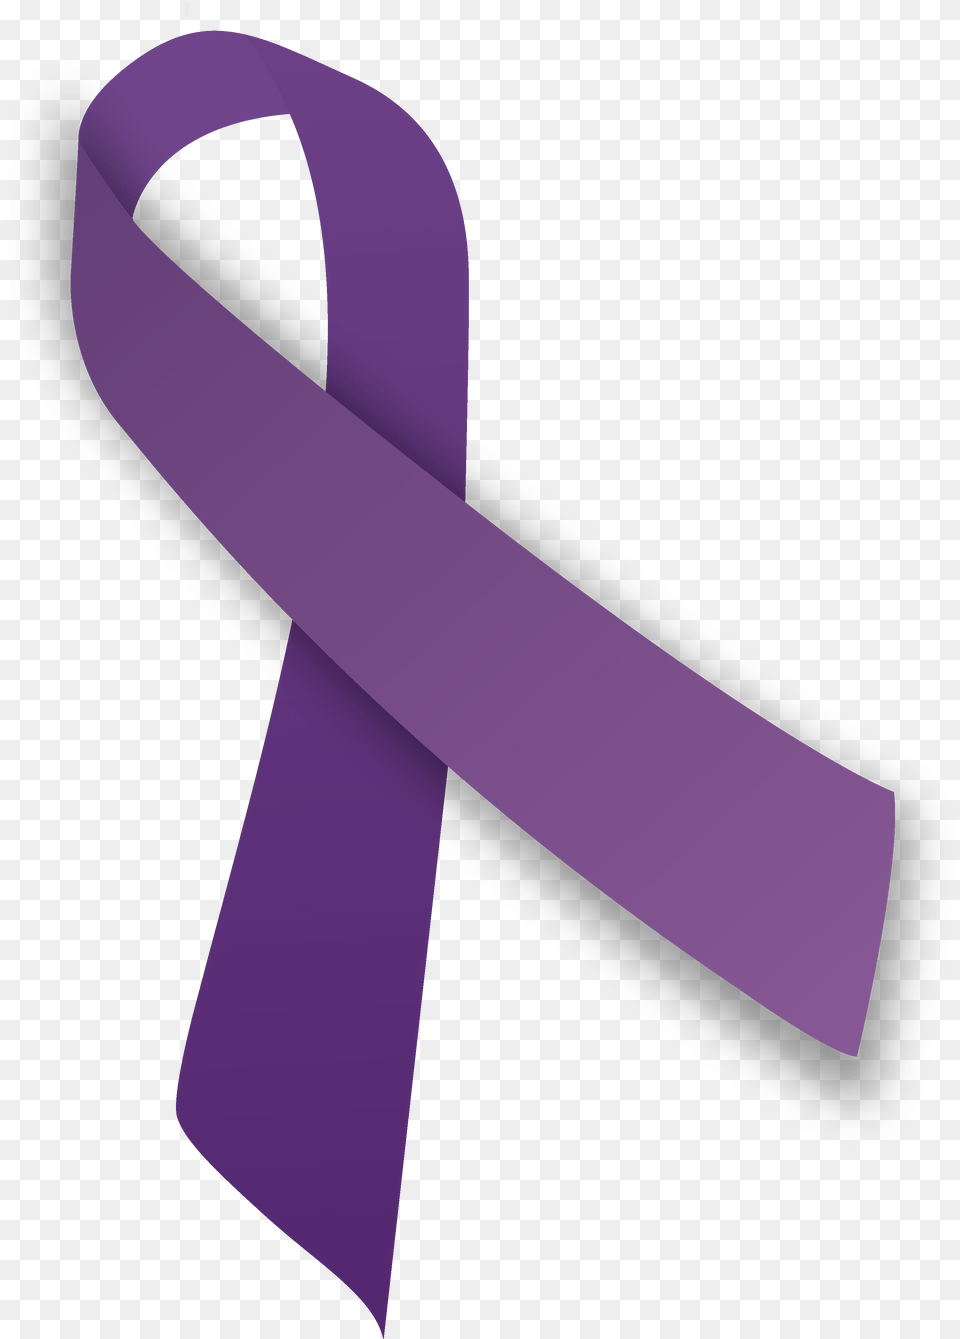 Ehealth In Pain Management And Patient Support Domestic Abuse Ribbon, Accessories, Formal Wear, Purple, Tie Png Image